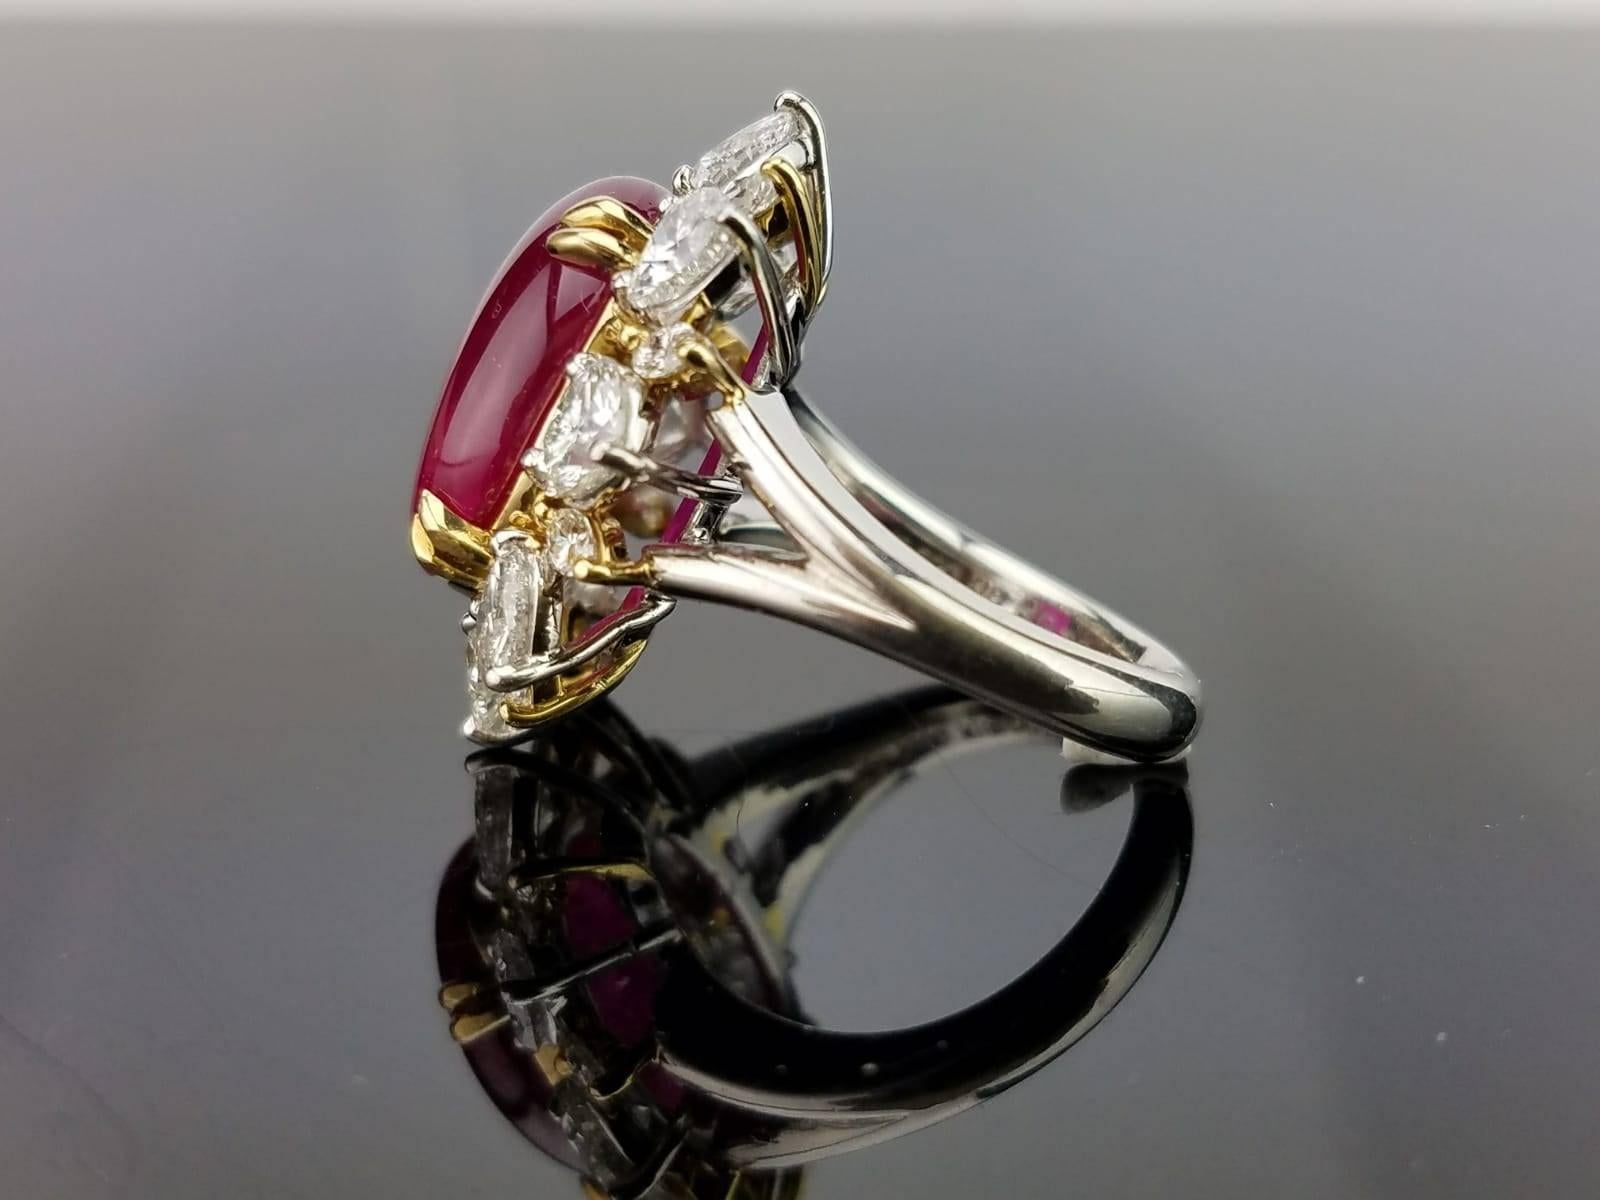 Oval Cut 9.13 Carat Burma Ruby and Diamond Cocktail Ring